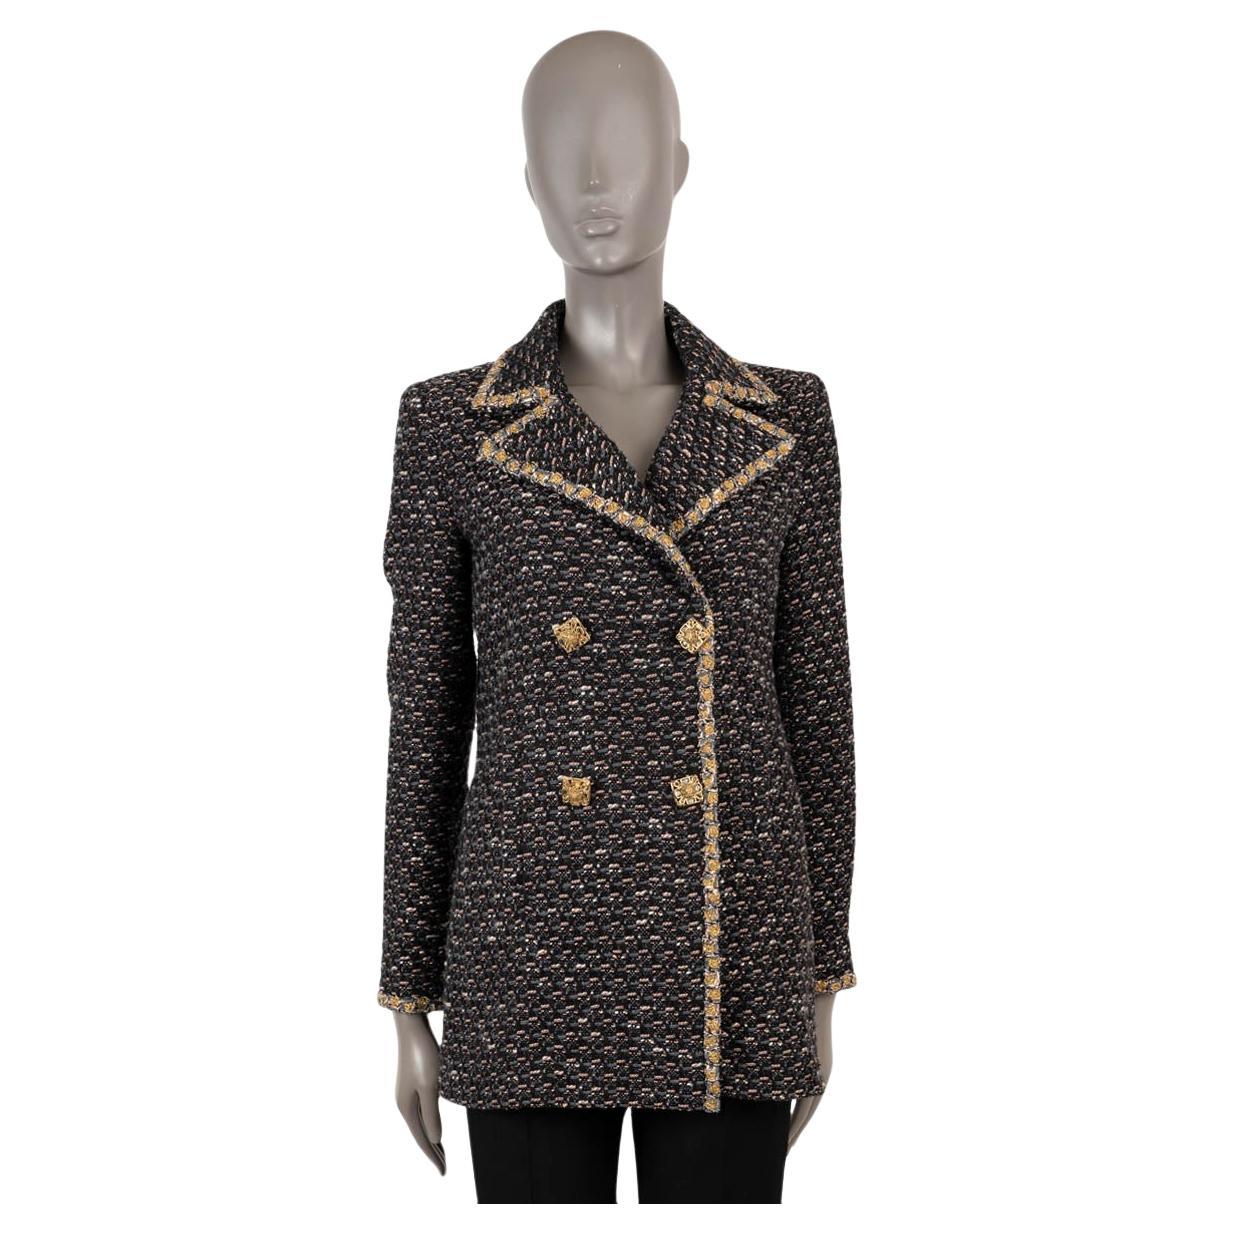 CHANEL black & grey wool 2011 11A BYCANCE TWEED Peacoat Jacket 38 S For Sale